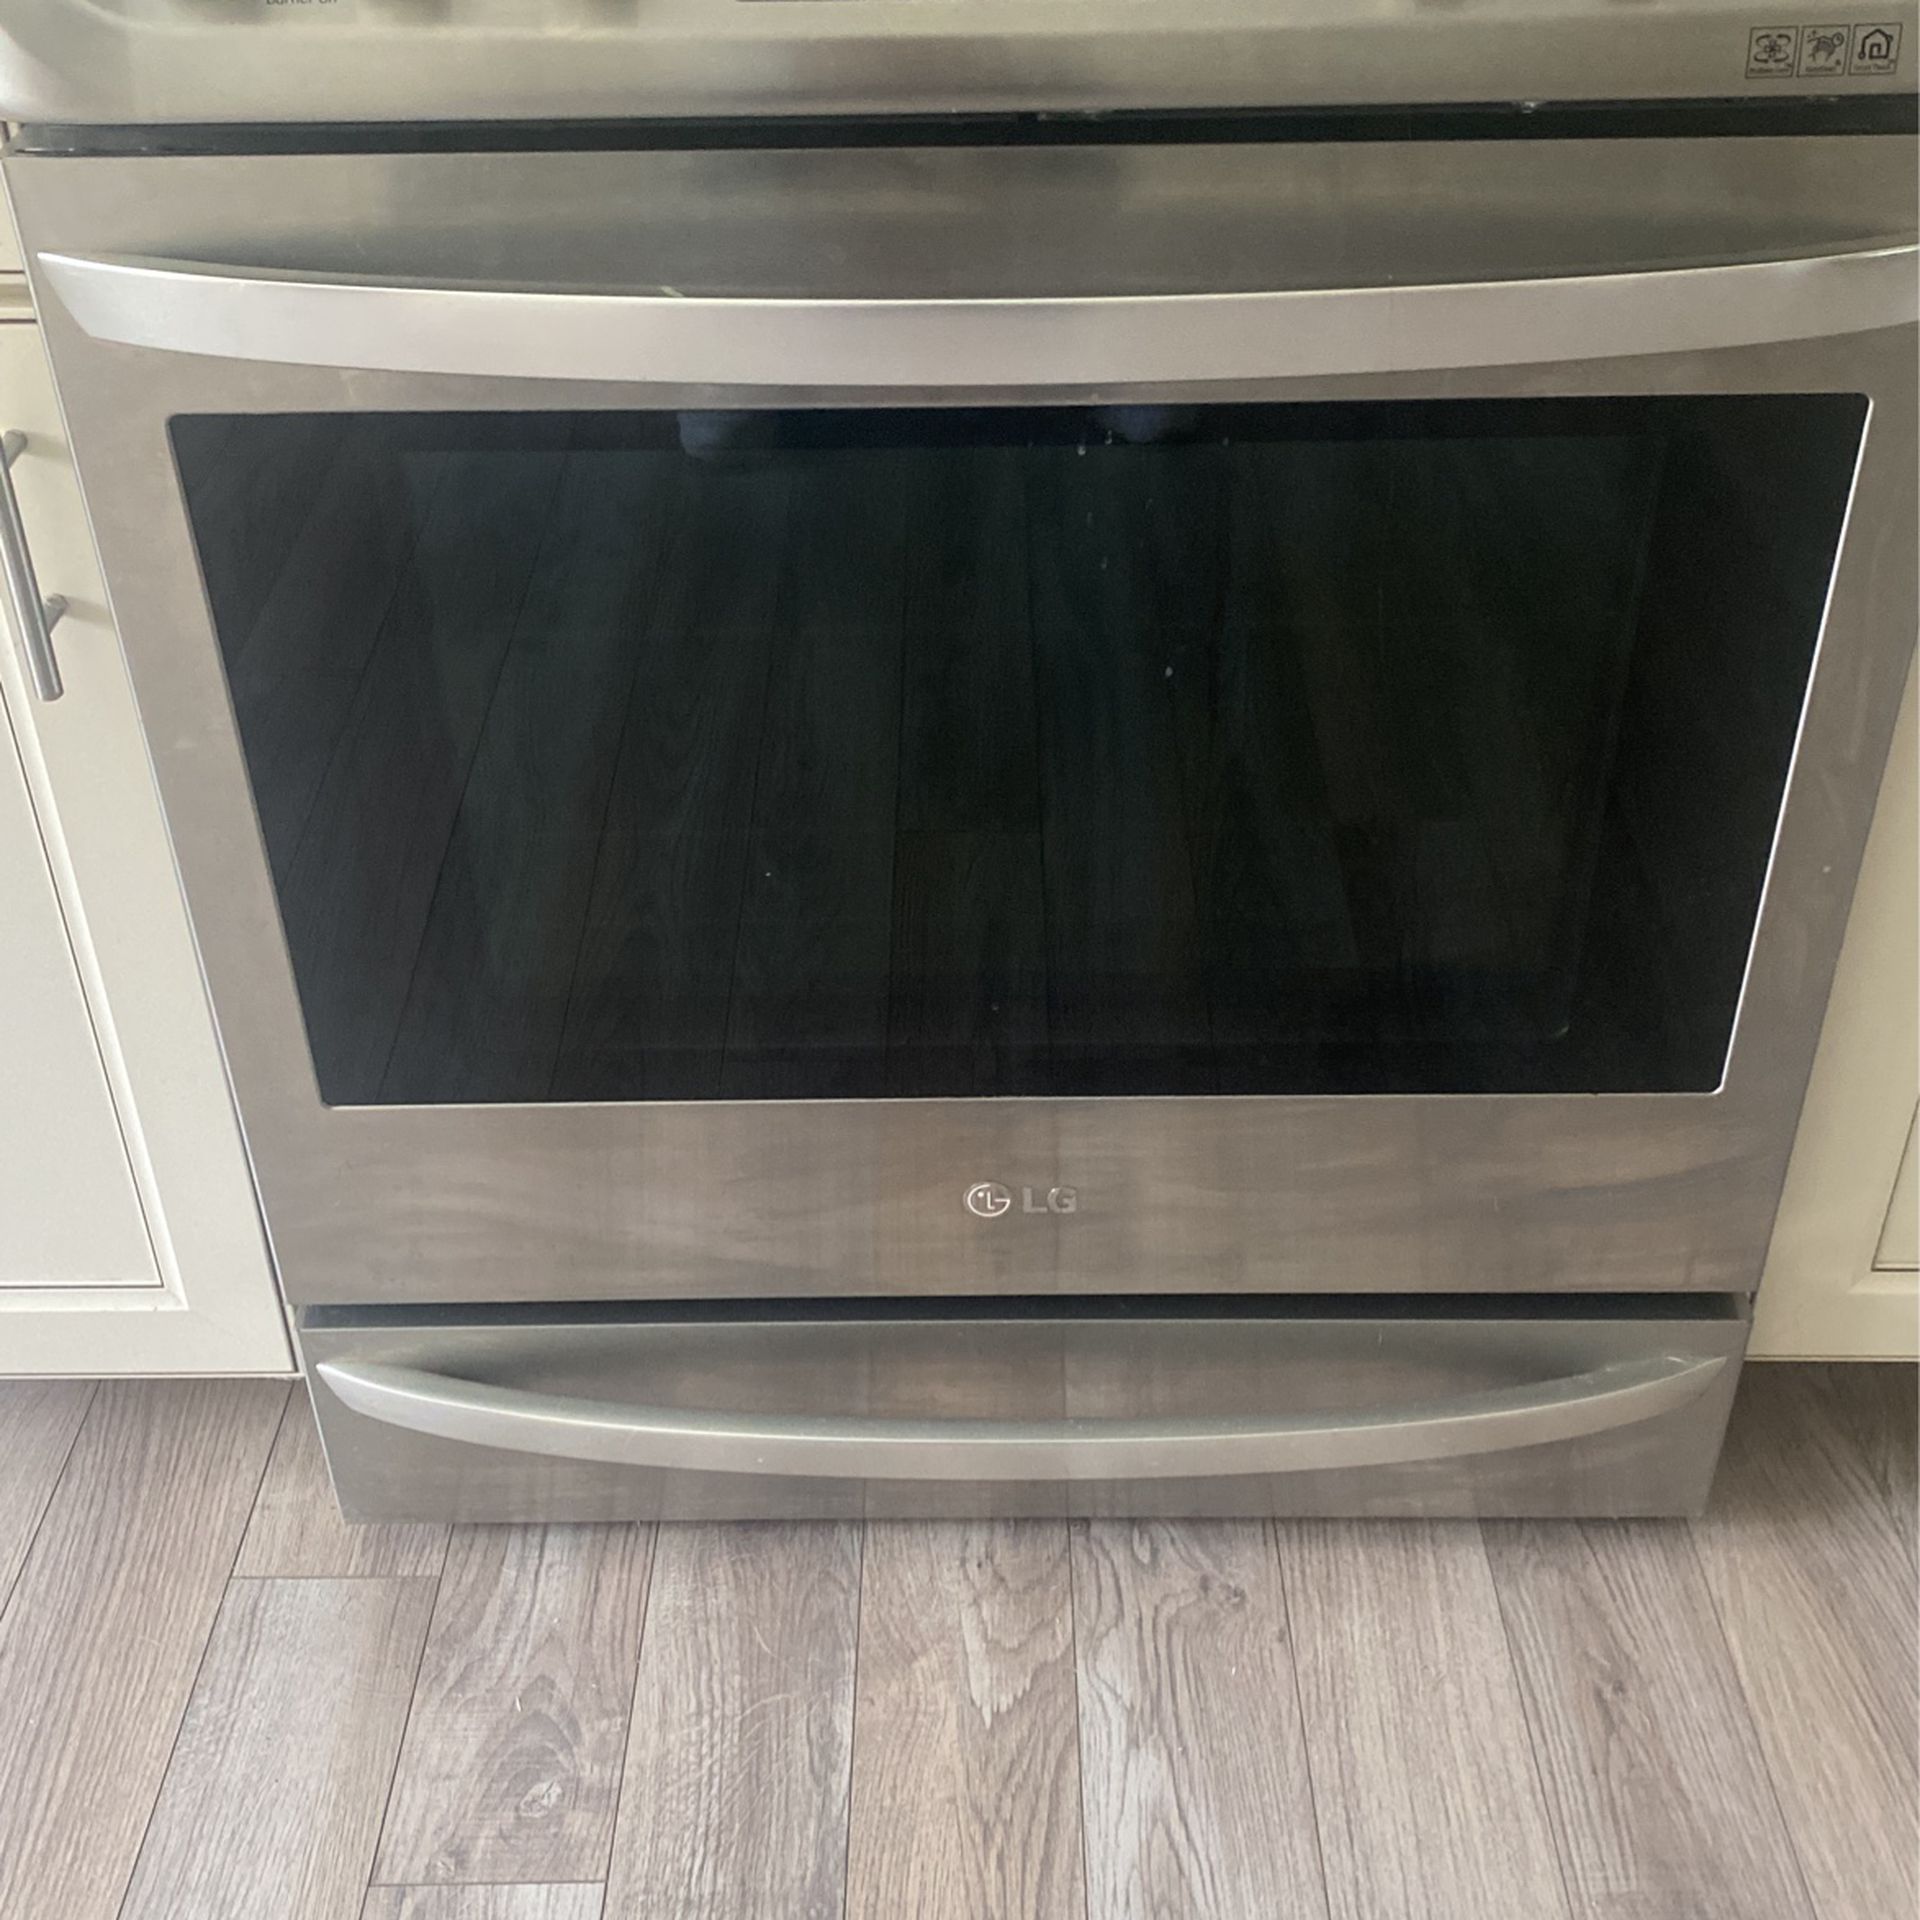 LG 30” Electric  Conv. Oven